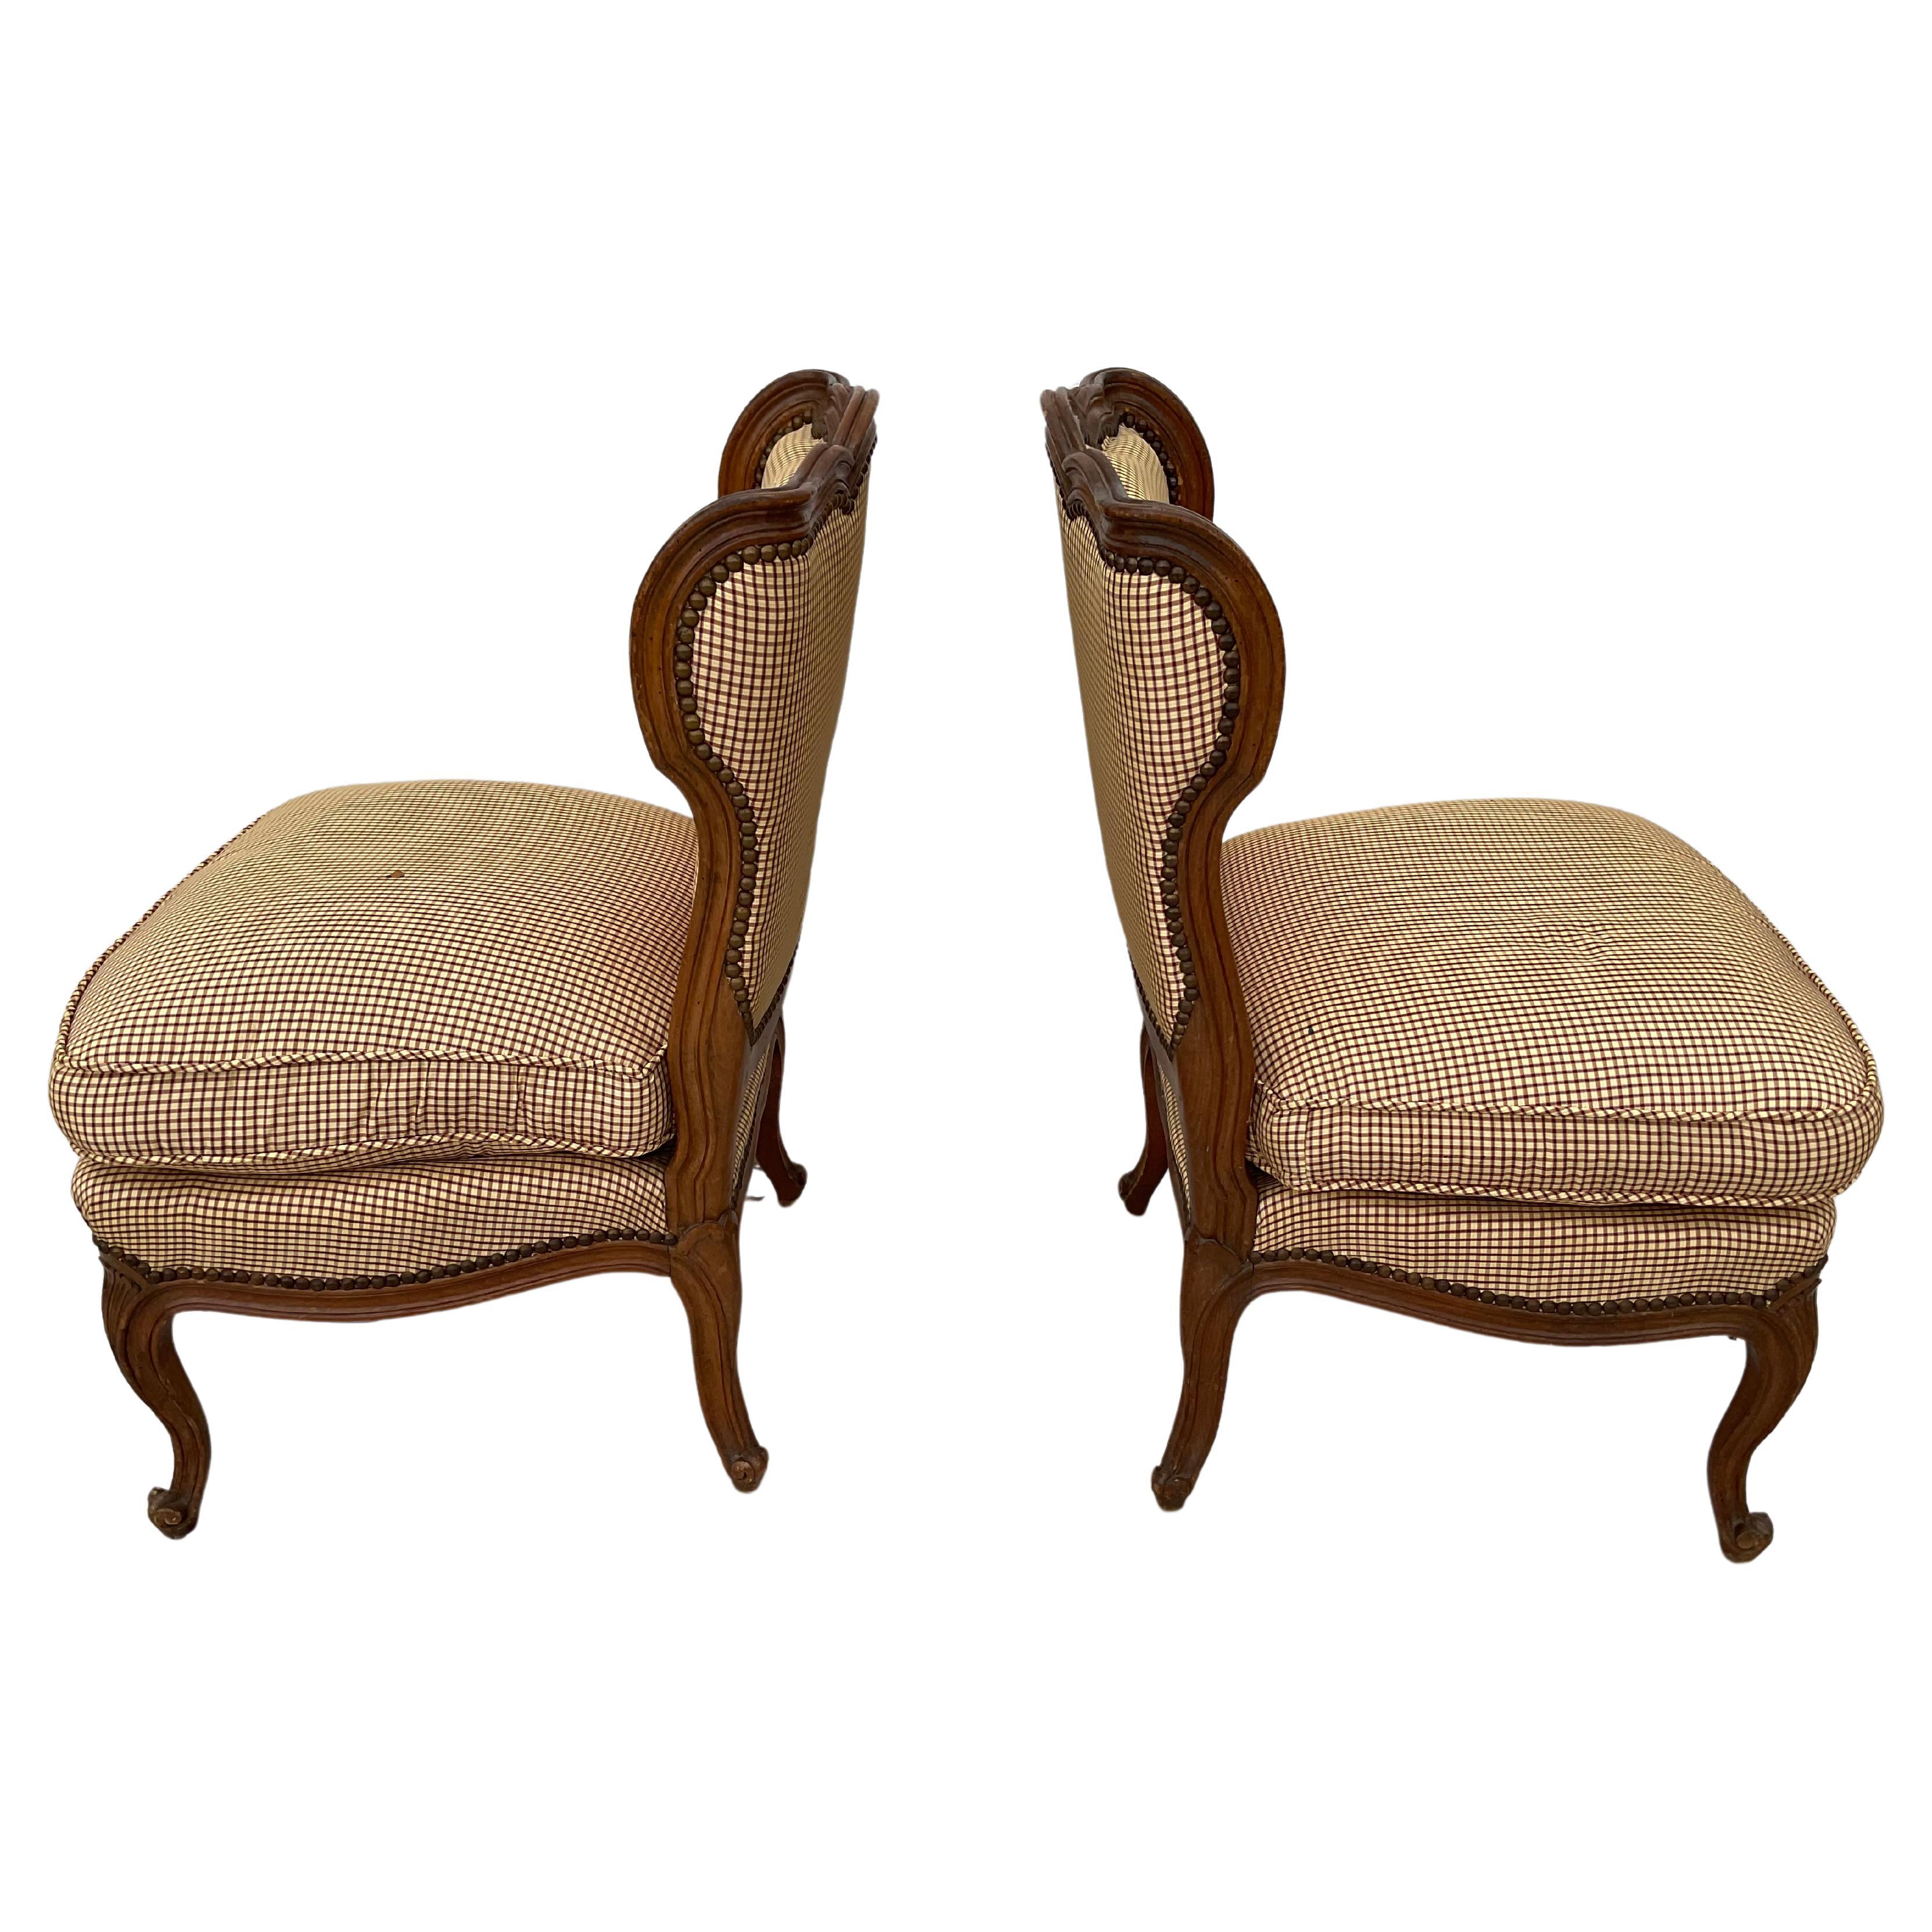 Pair Of French Country Slipper Chairs In Good Condition For Sale In Bradenton, FL